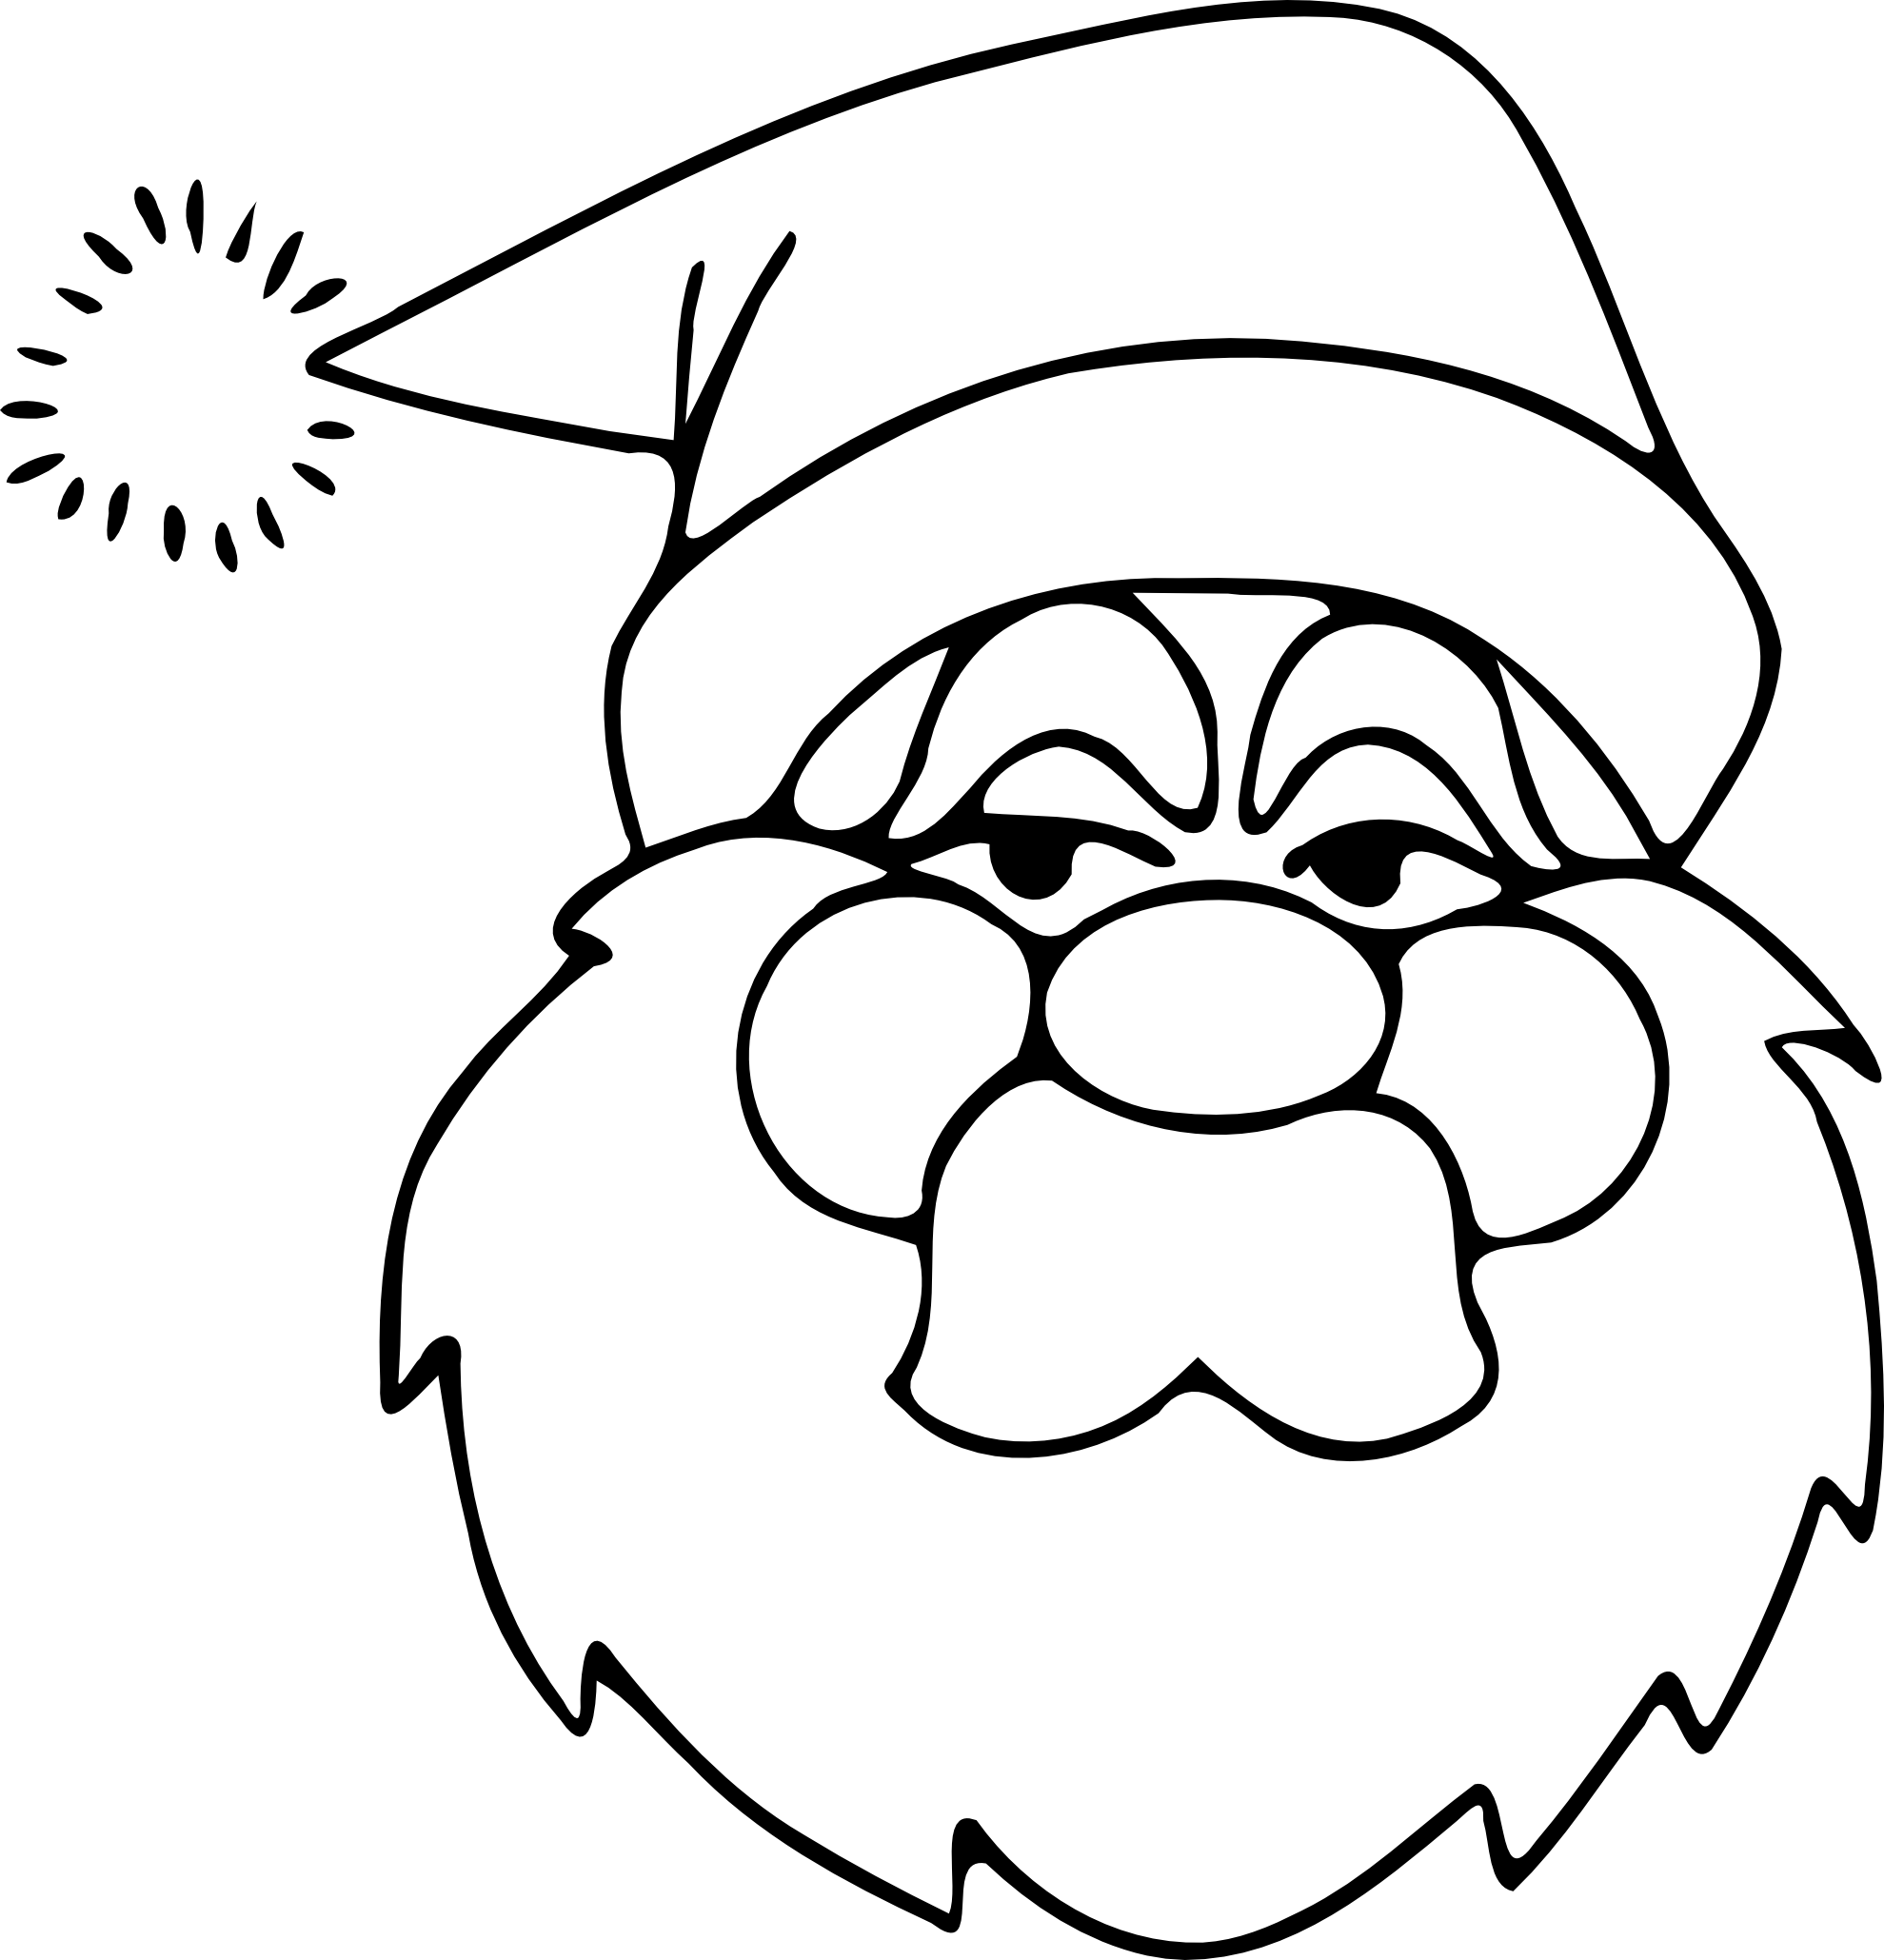 Black And White Christmas Images - ClipArt Best